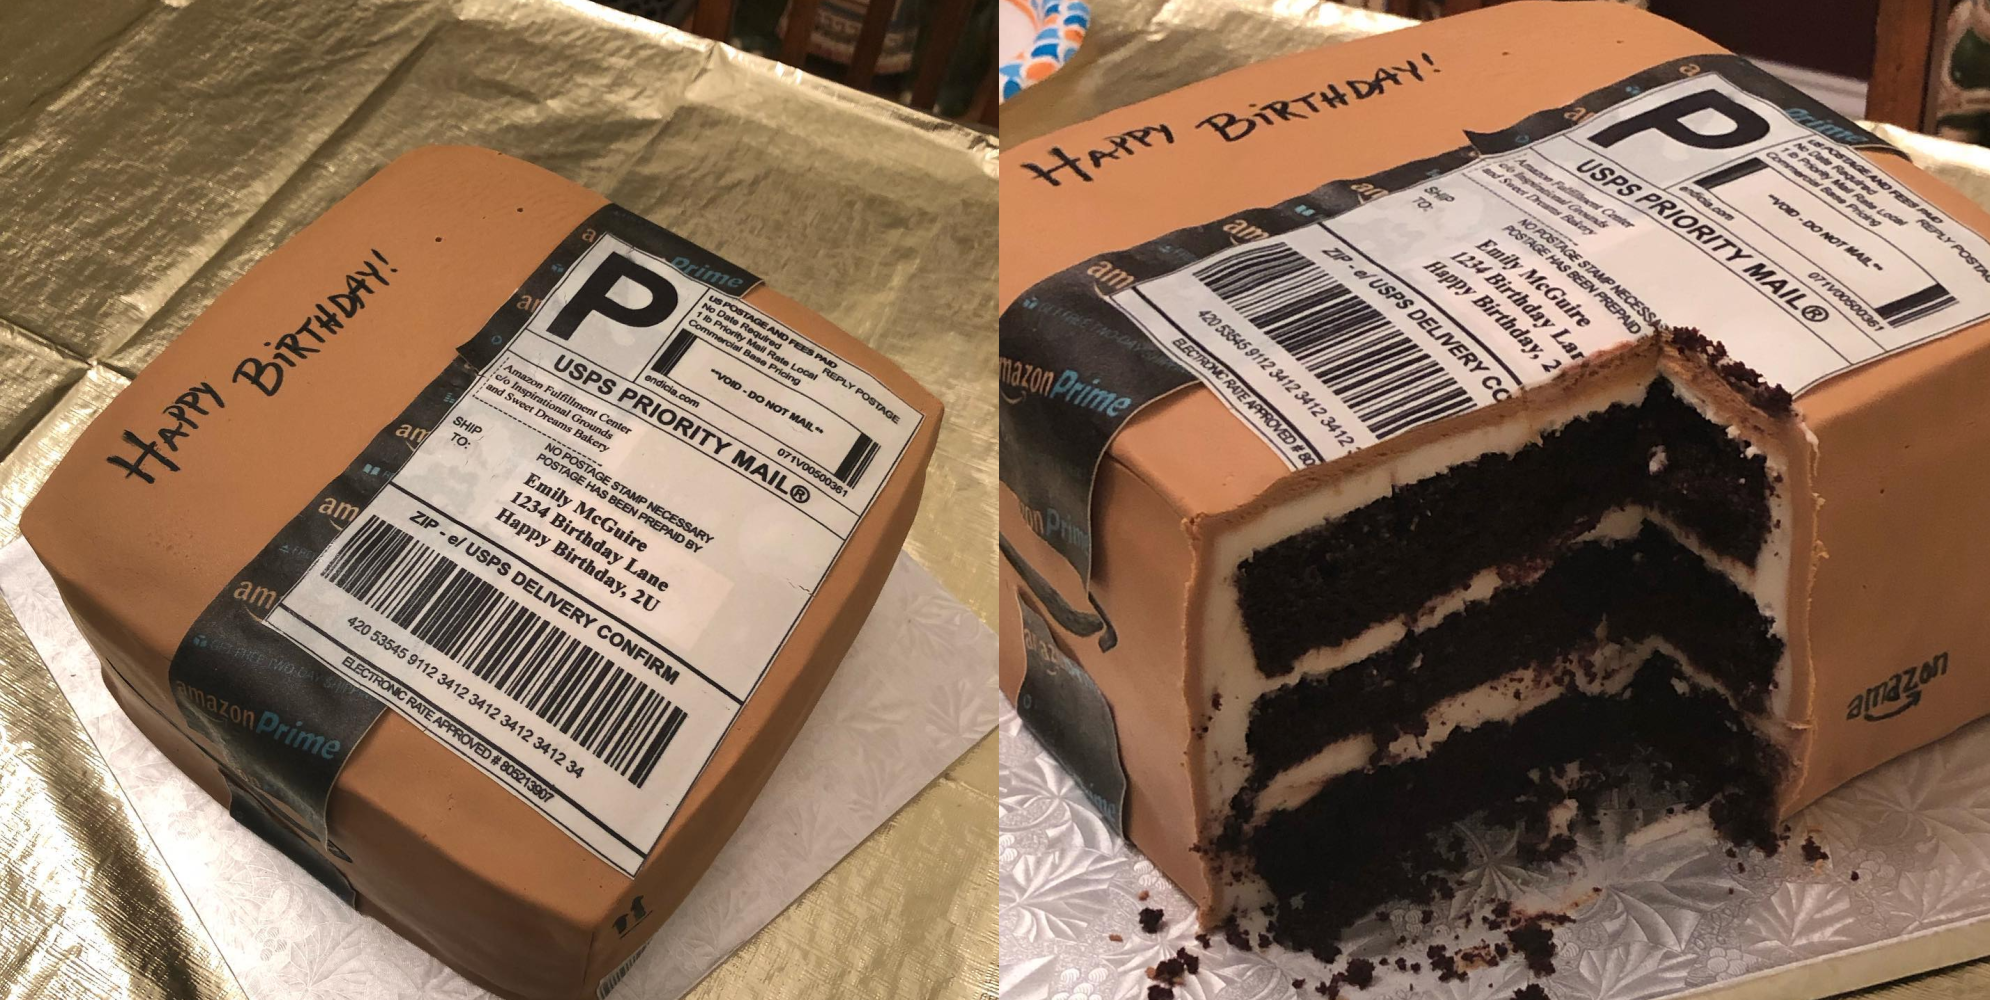 Husband Surprises Wife With Amazon Prime Package Birthday Cake